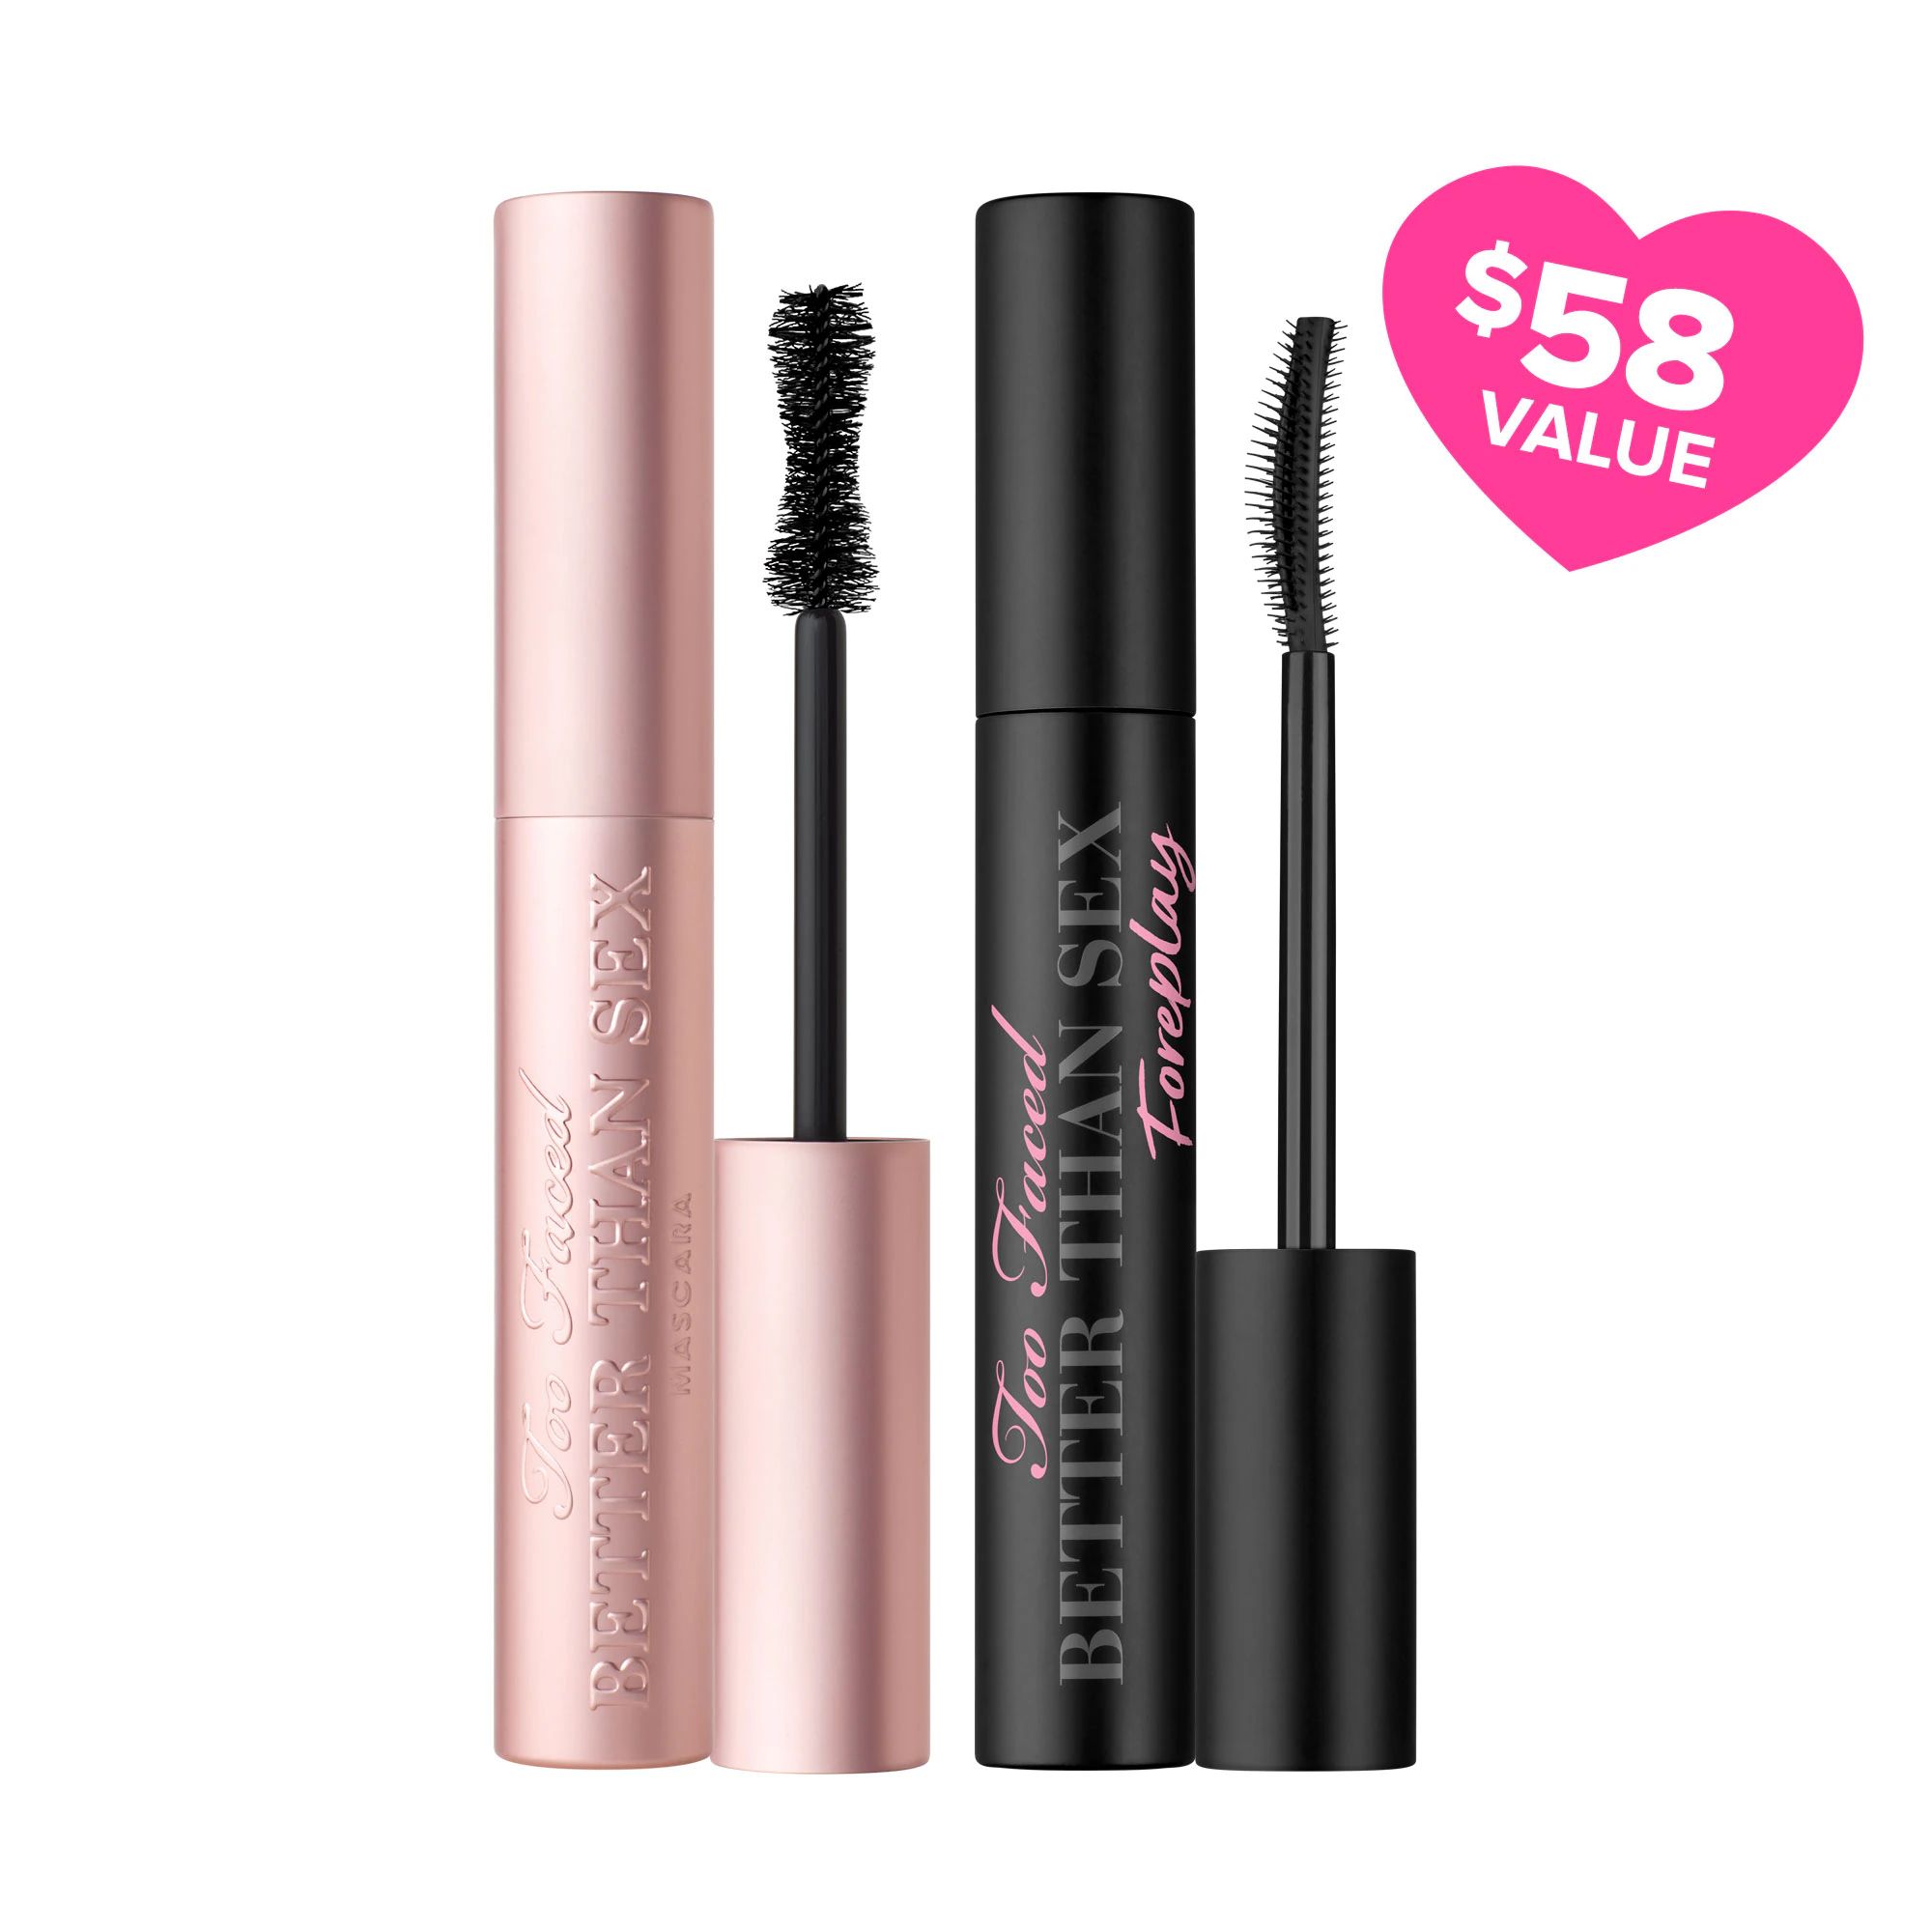 Lash Primer and Mascara Duo | Limited-Edition Full-Size Set | Too Faced US